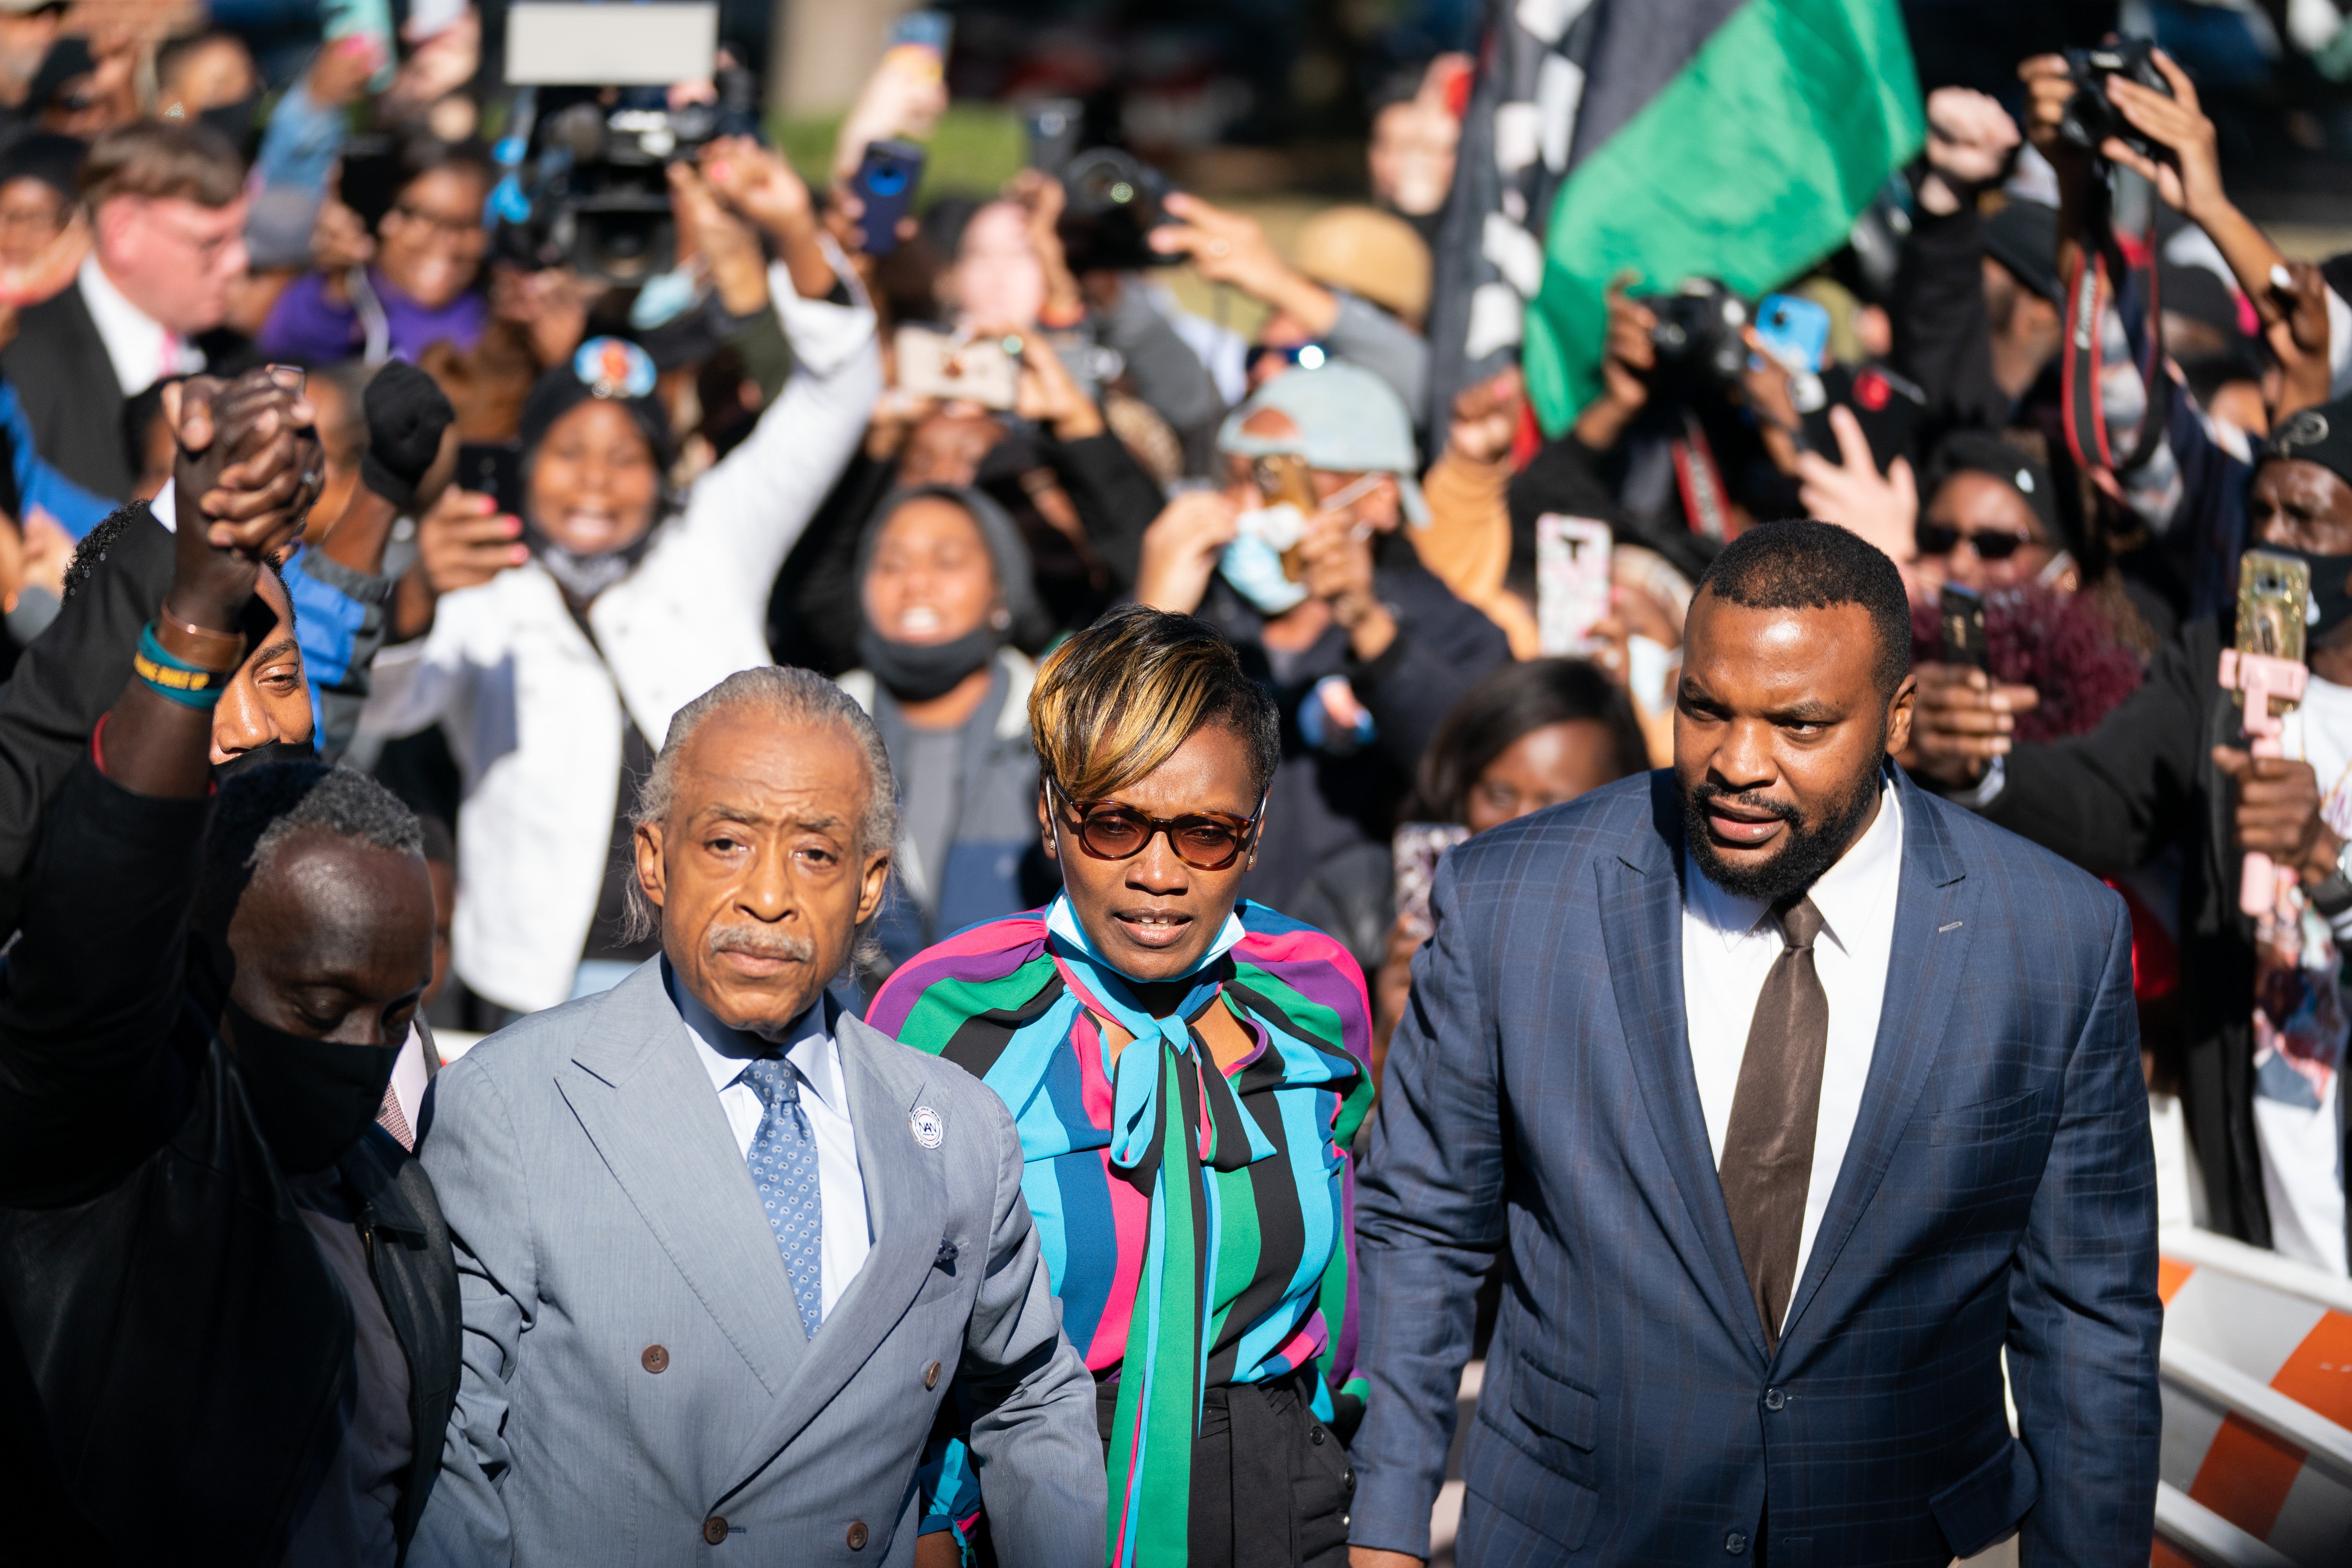 Lee Merritt with Ahmaud Arbery’s mother Wanda Cooper-Jones and Rev. Al Sharpton (from right to left) outside the courthouse in Georgia after the Black jogger’s three killers were found guilty of murder